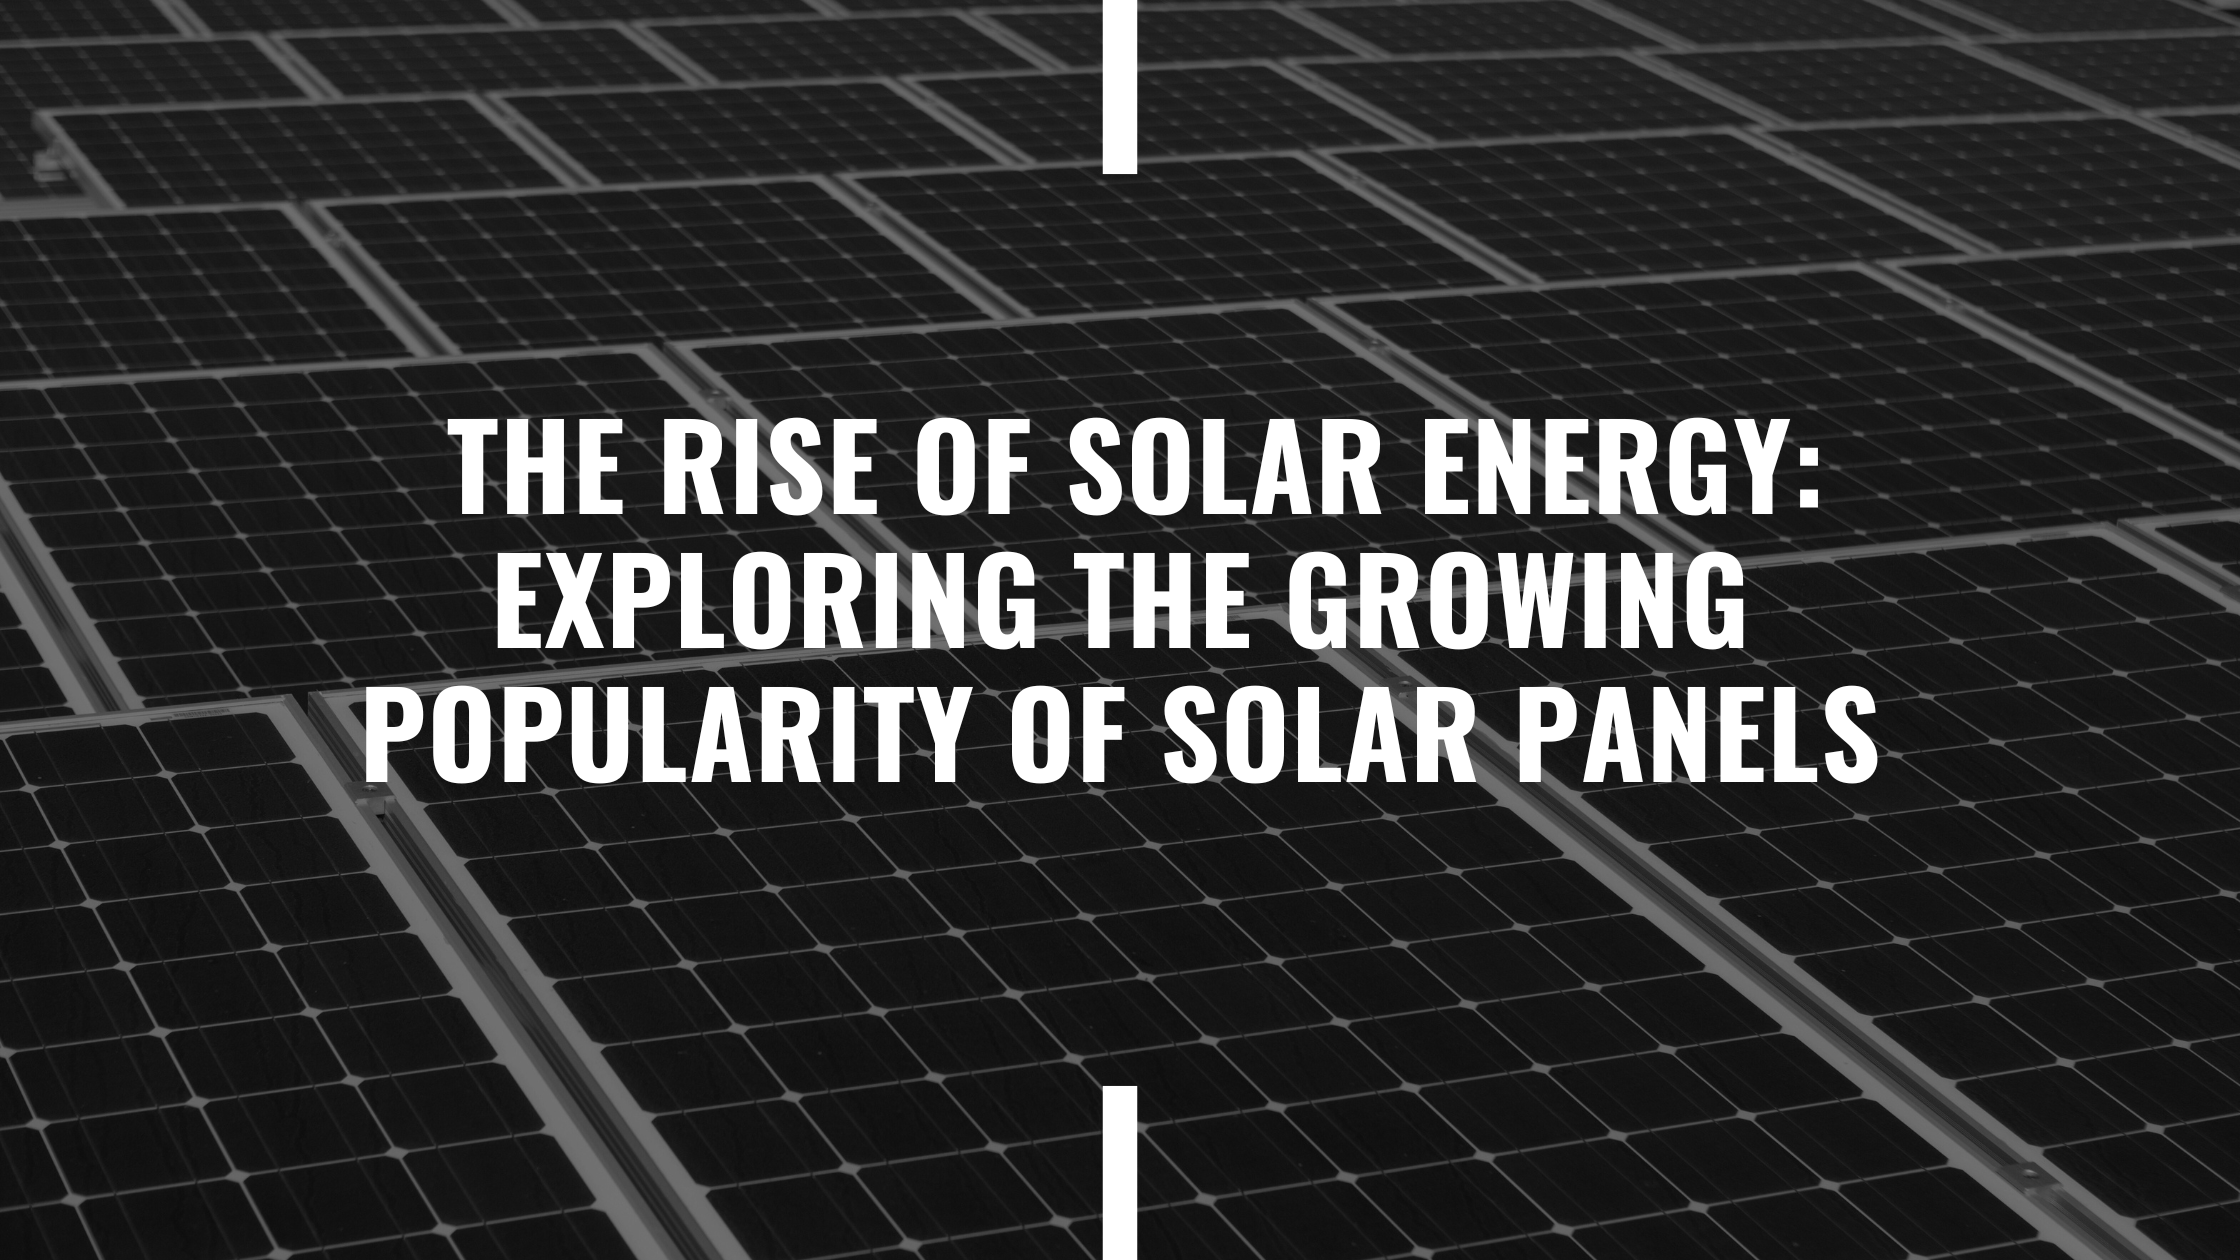 Title: The Rise of Solar Energy: Exploring the Growing Popularity of solar panels